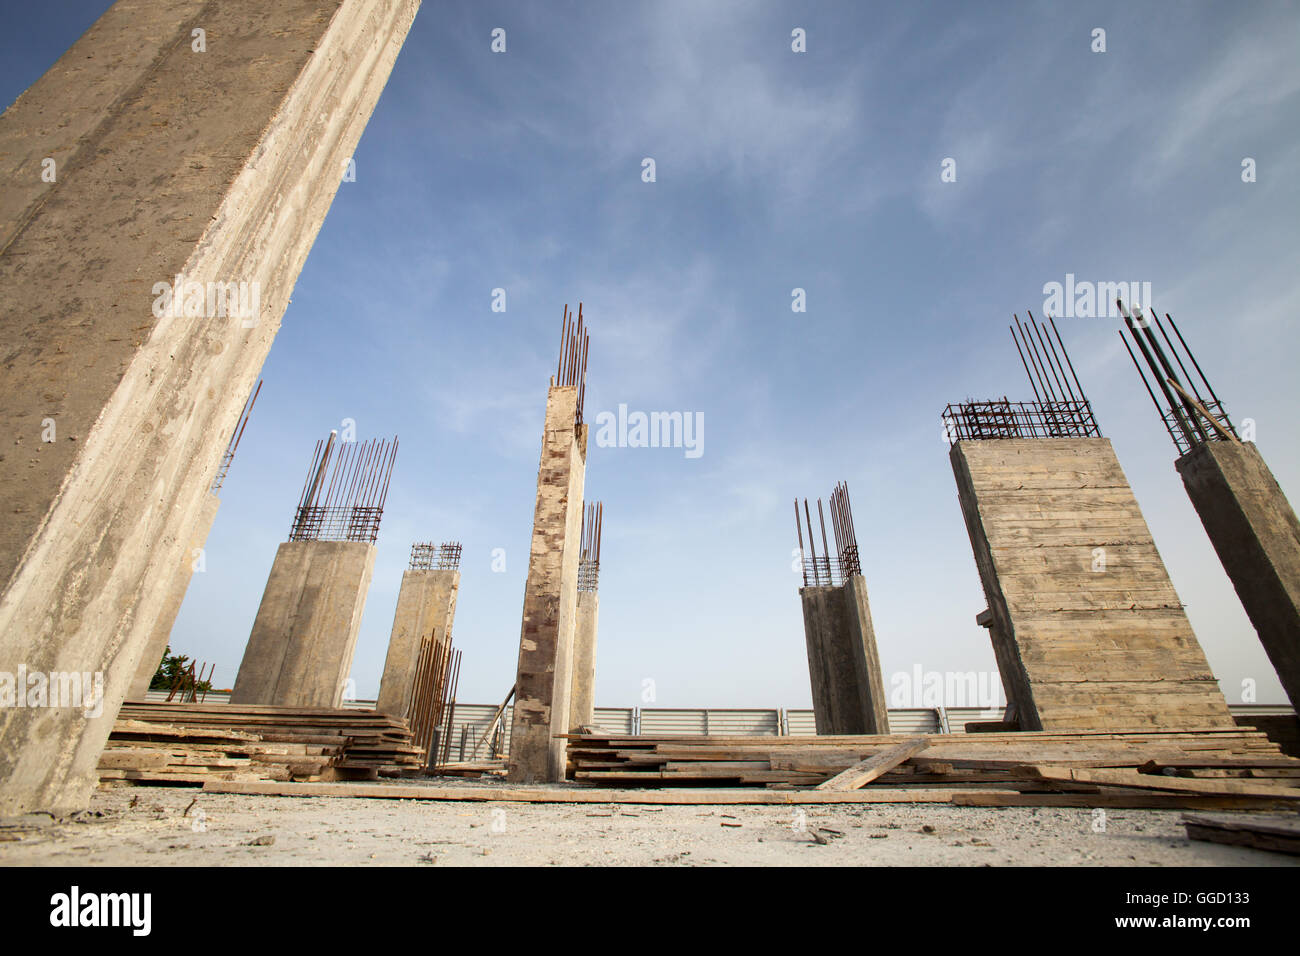 Construction site - Pillars of a building in the making against blue sky Stock Photo